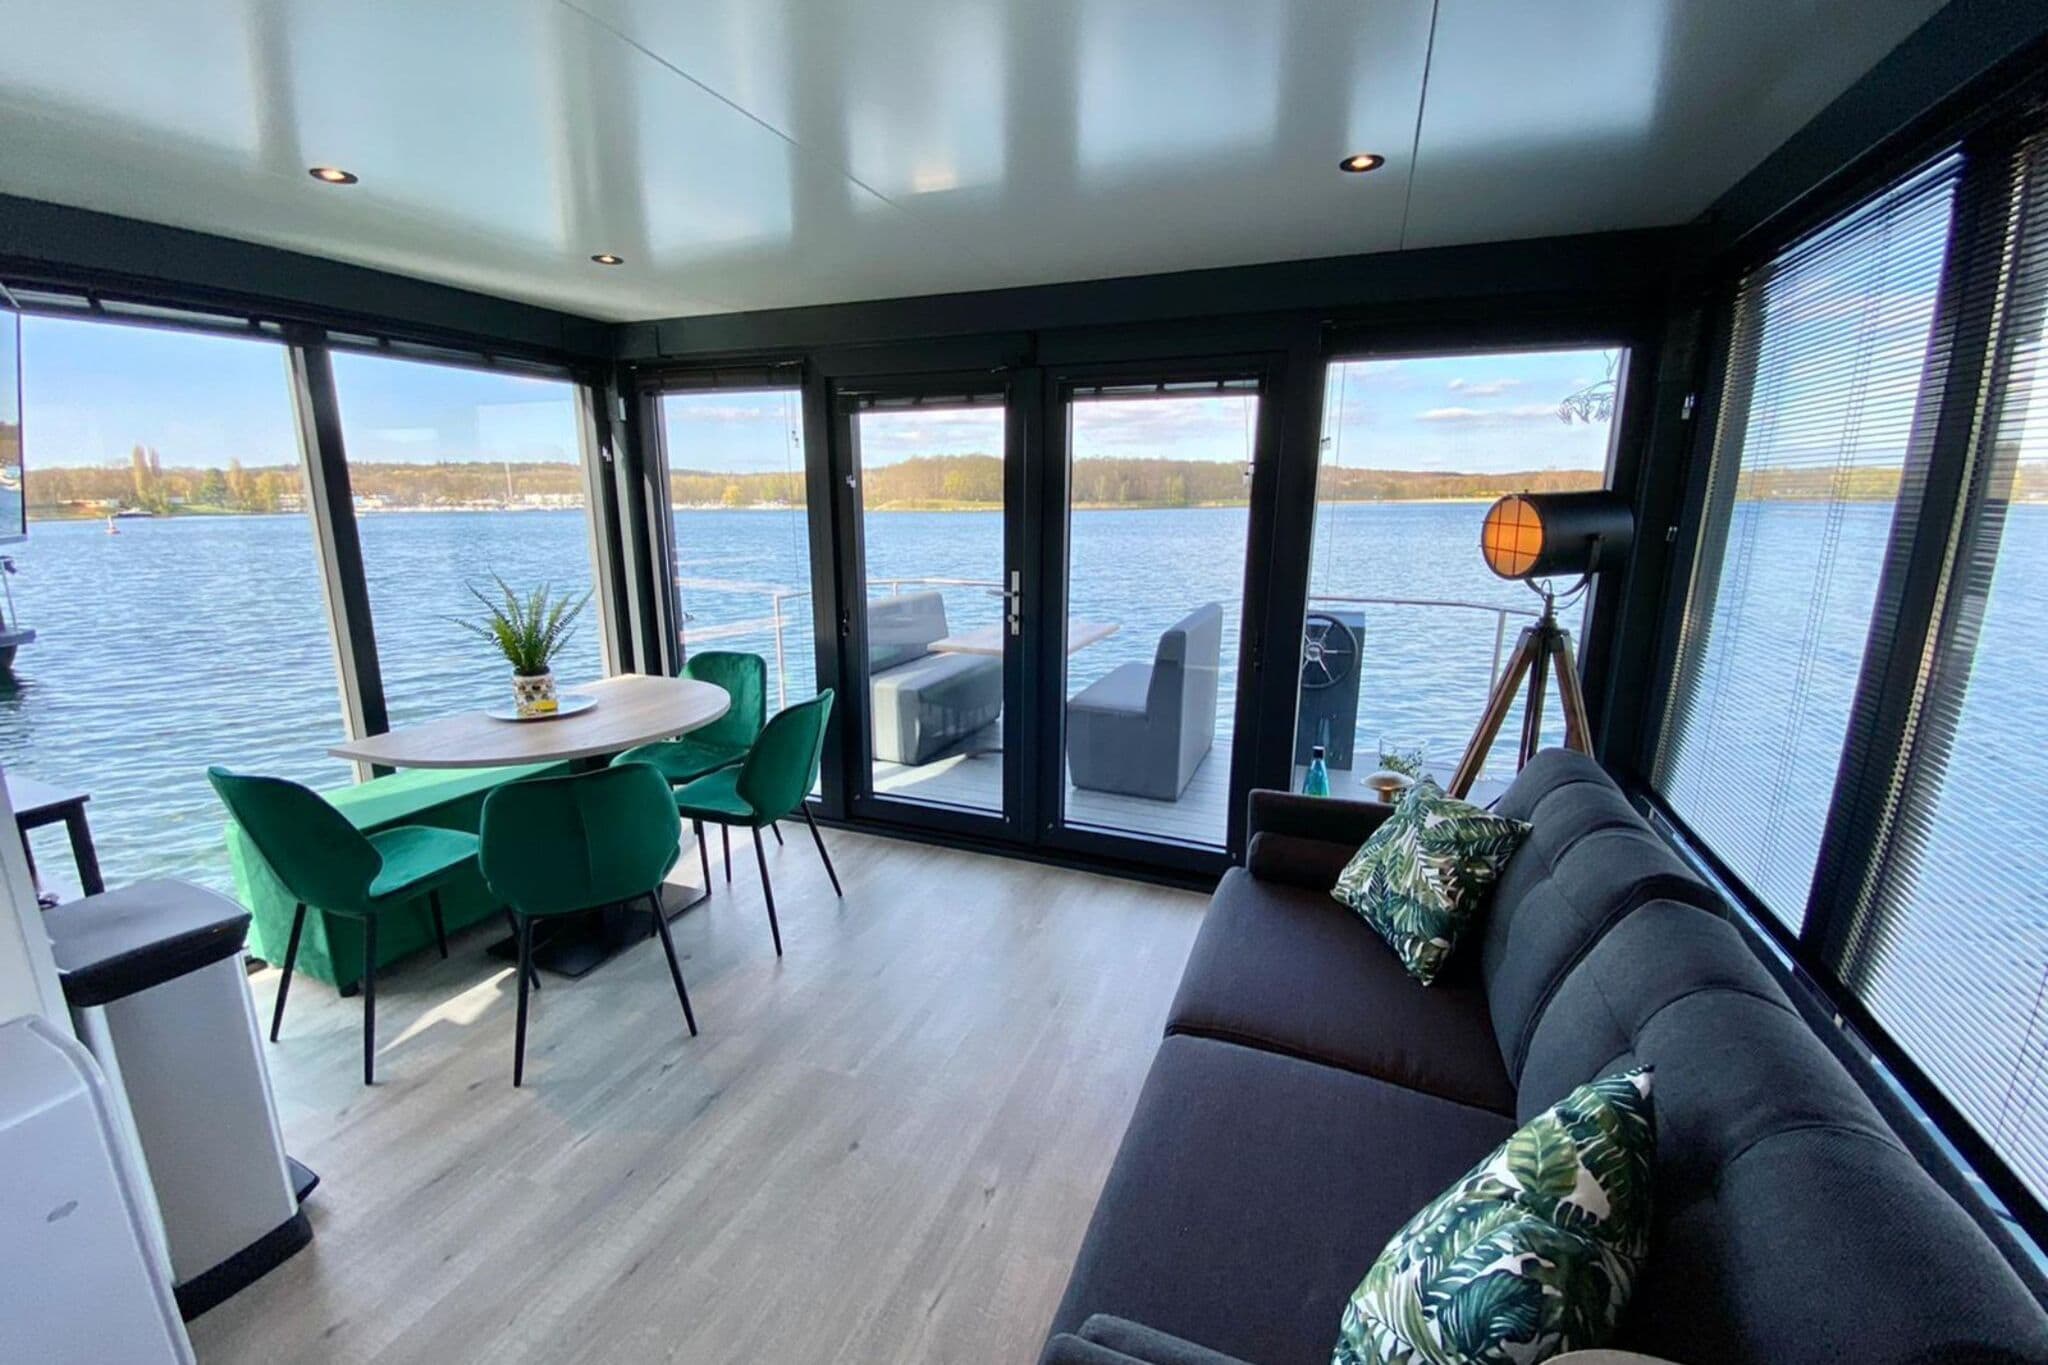 Luxury houseboat with beautiful views